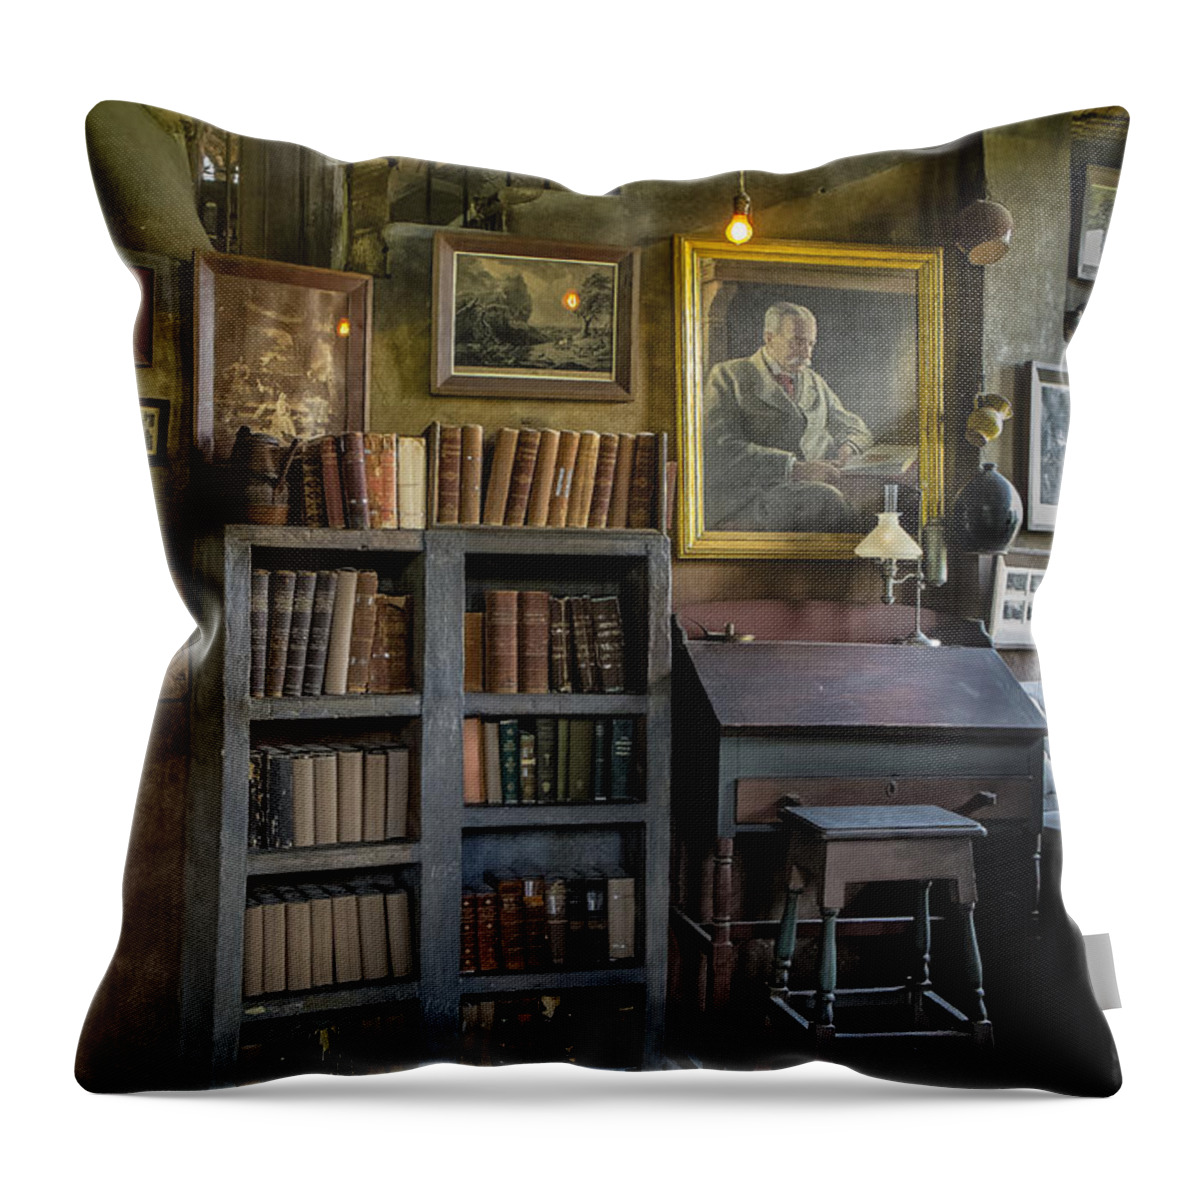 Byzantine Throw Pillow featuring the photograph Fonthill Castle Saloon by Susan Candelario